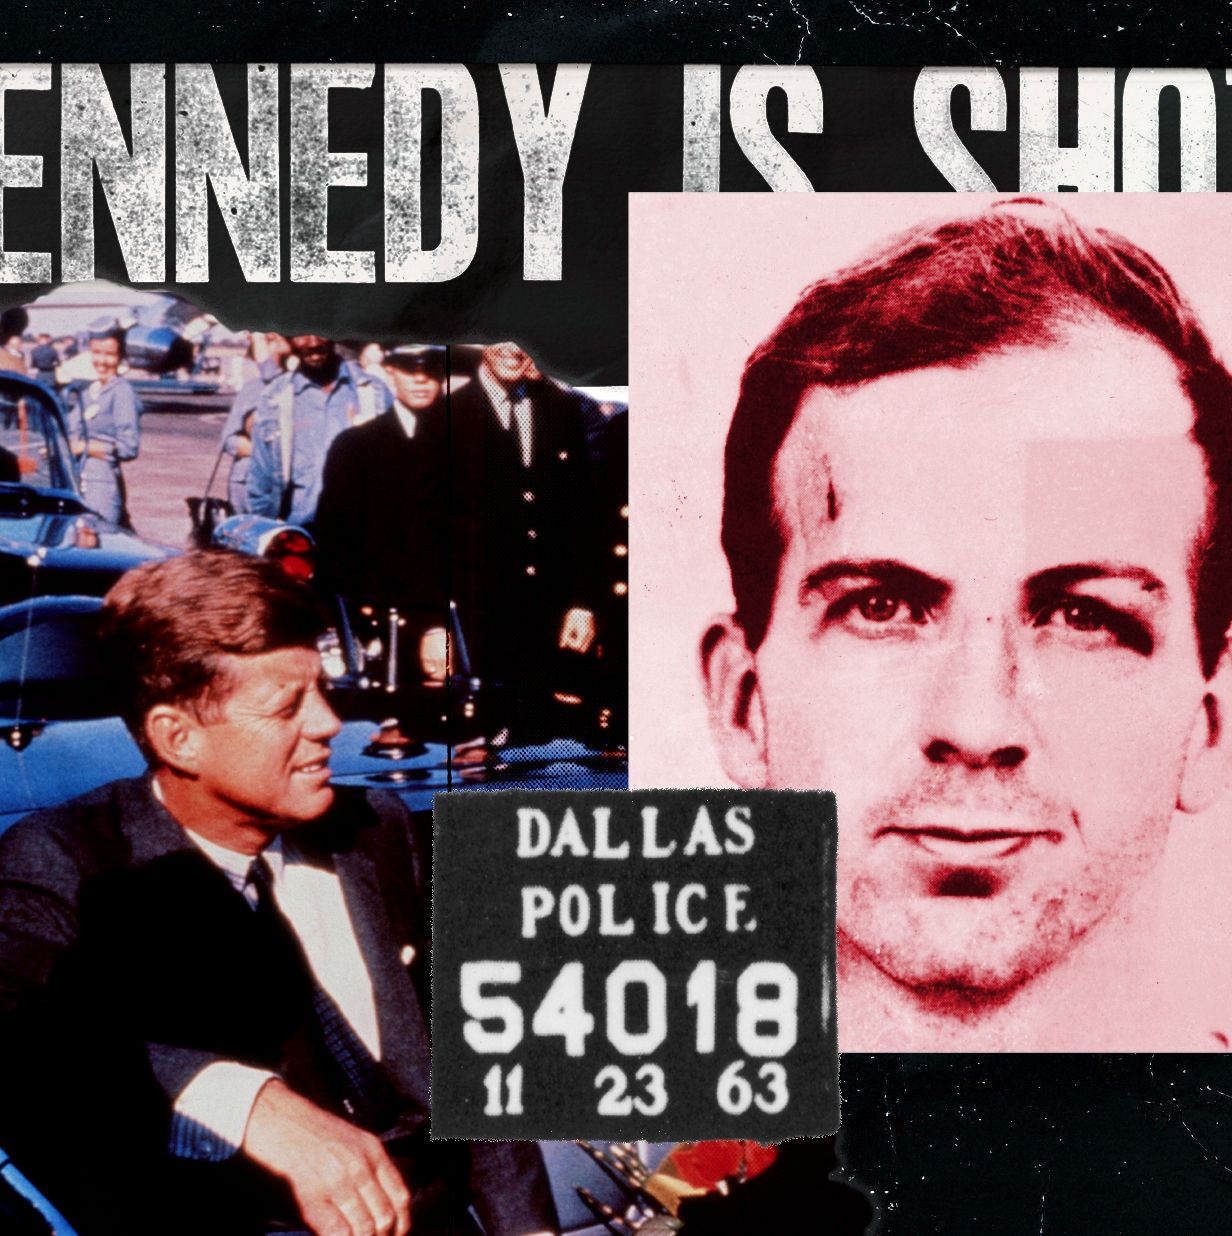 Who Really Killed JFK? After 60 Years and New Clues, the Truth Looks Different